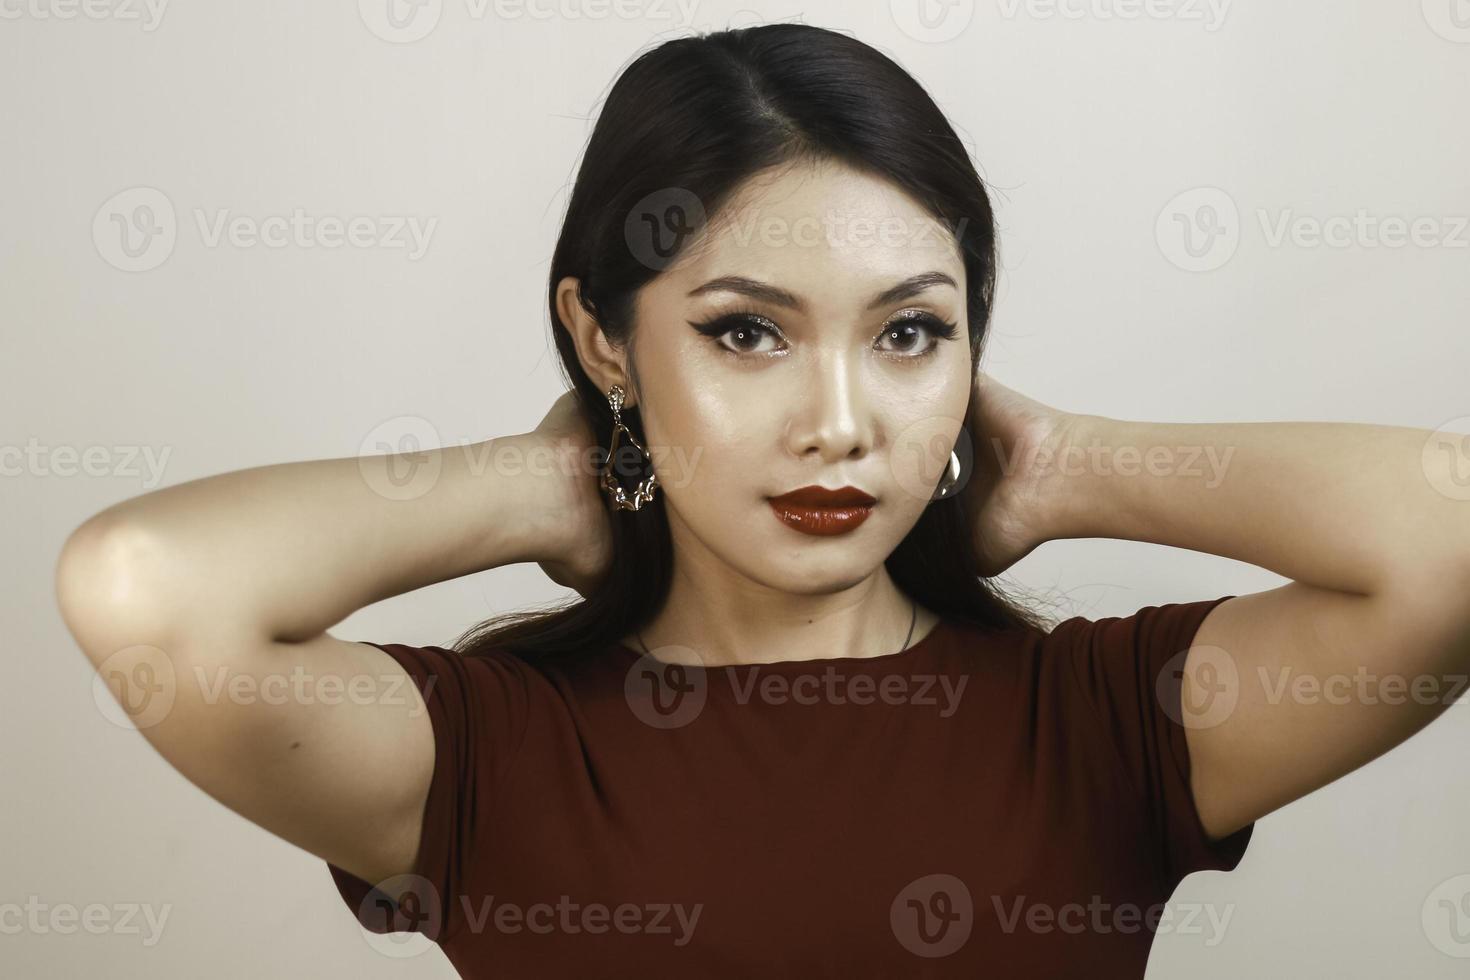 A fierce-looking Asian woman in a red shirt posing in front of white background photo